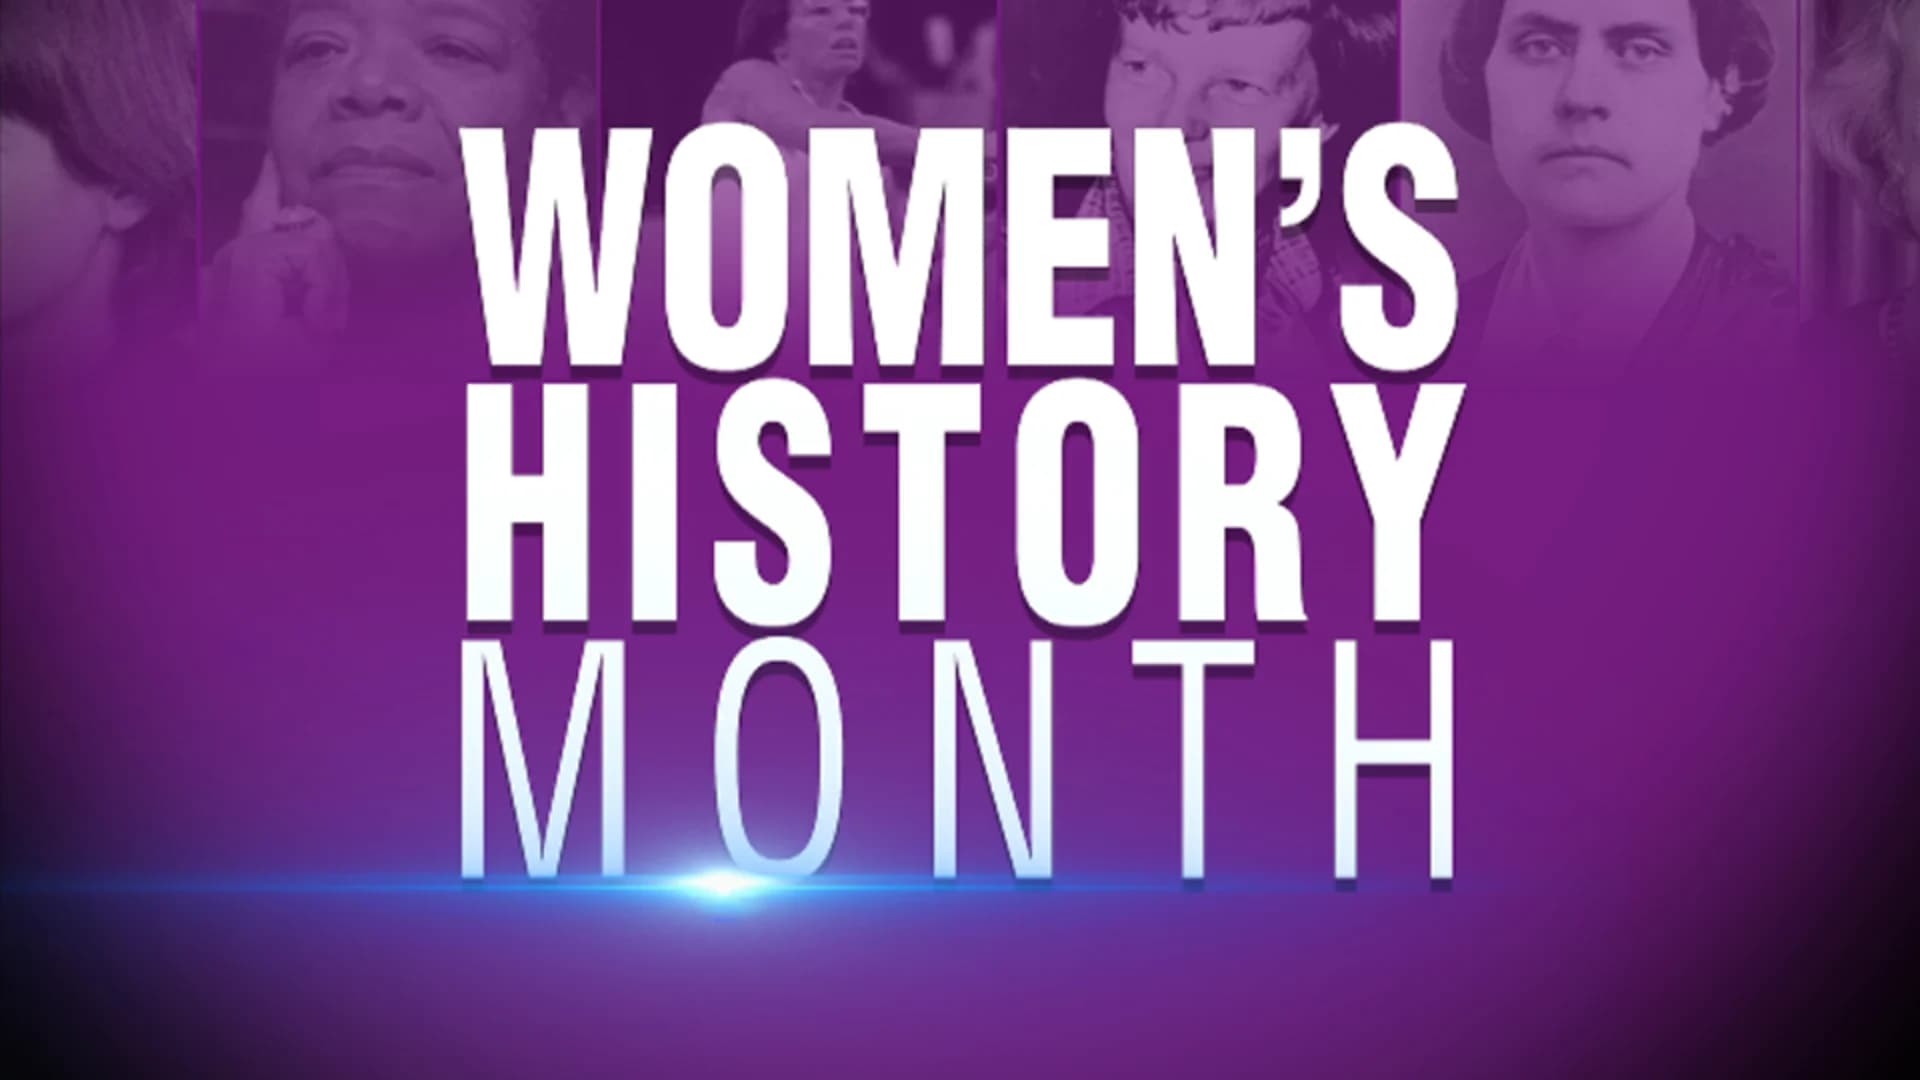 Women's History Month 2018 - Series Information